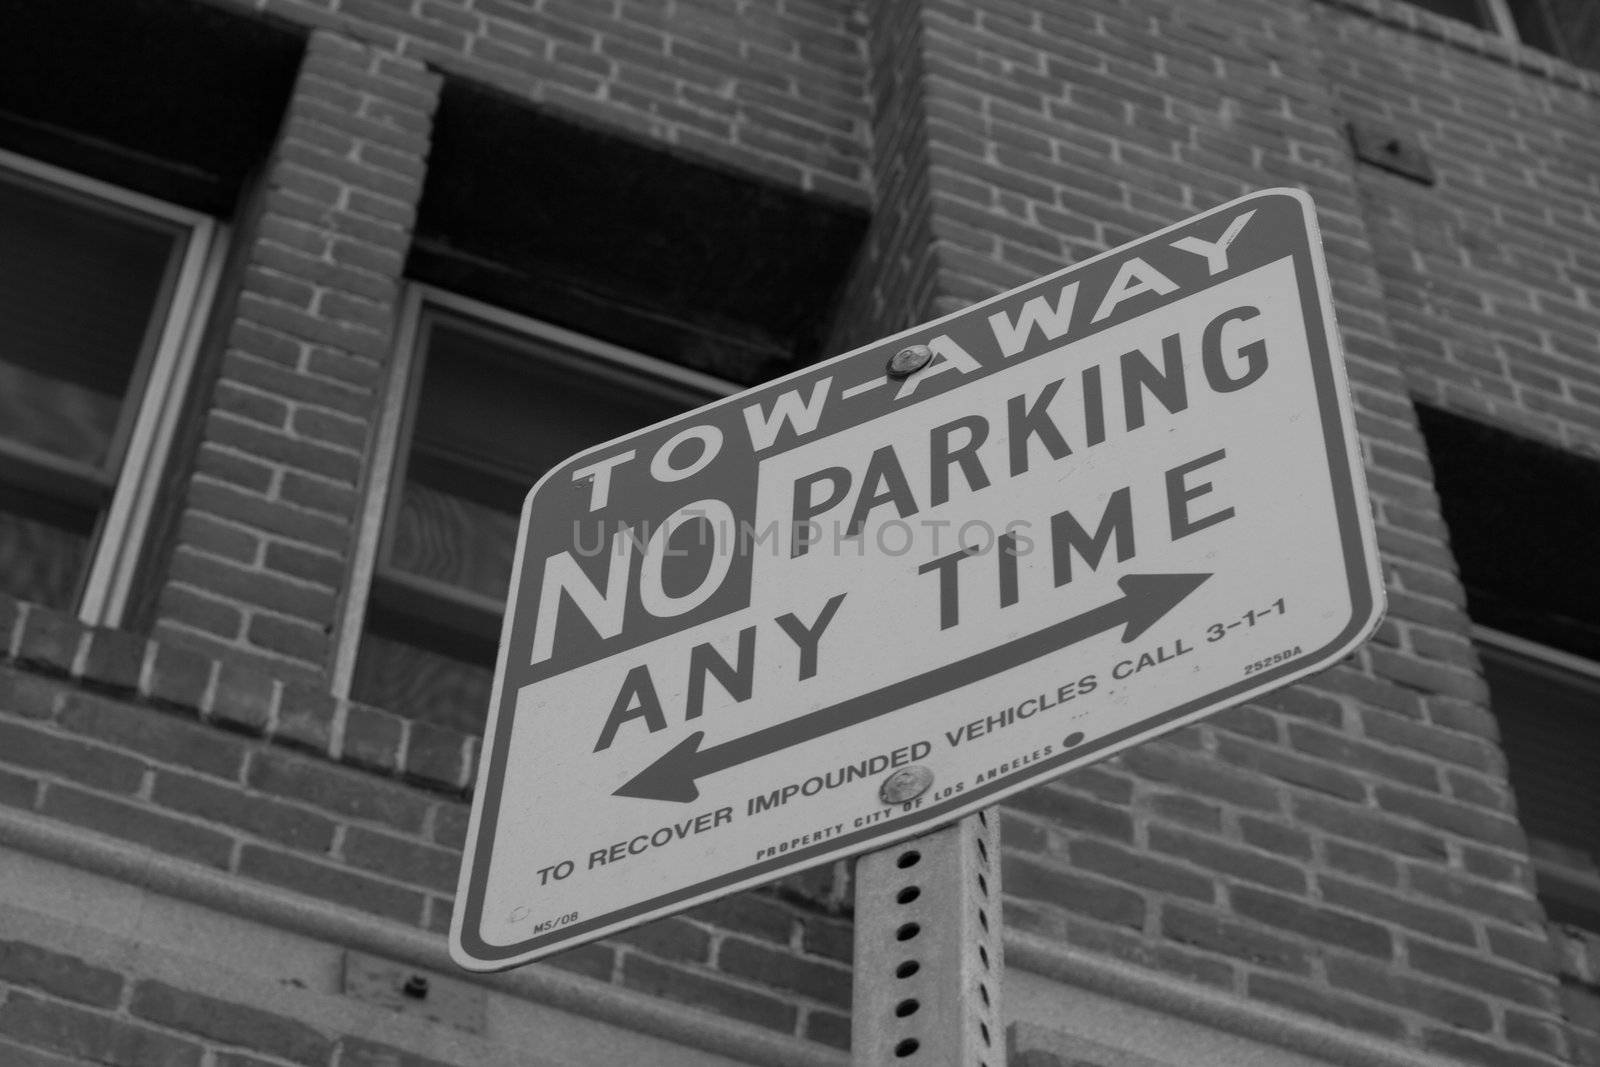 A photograph of a Tow Away No Parking Sign.  The sign has an old brick building in the background.